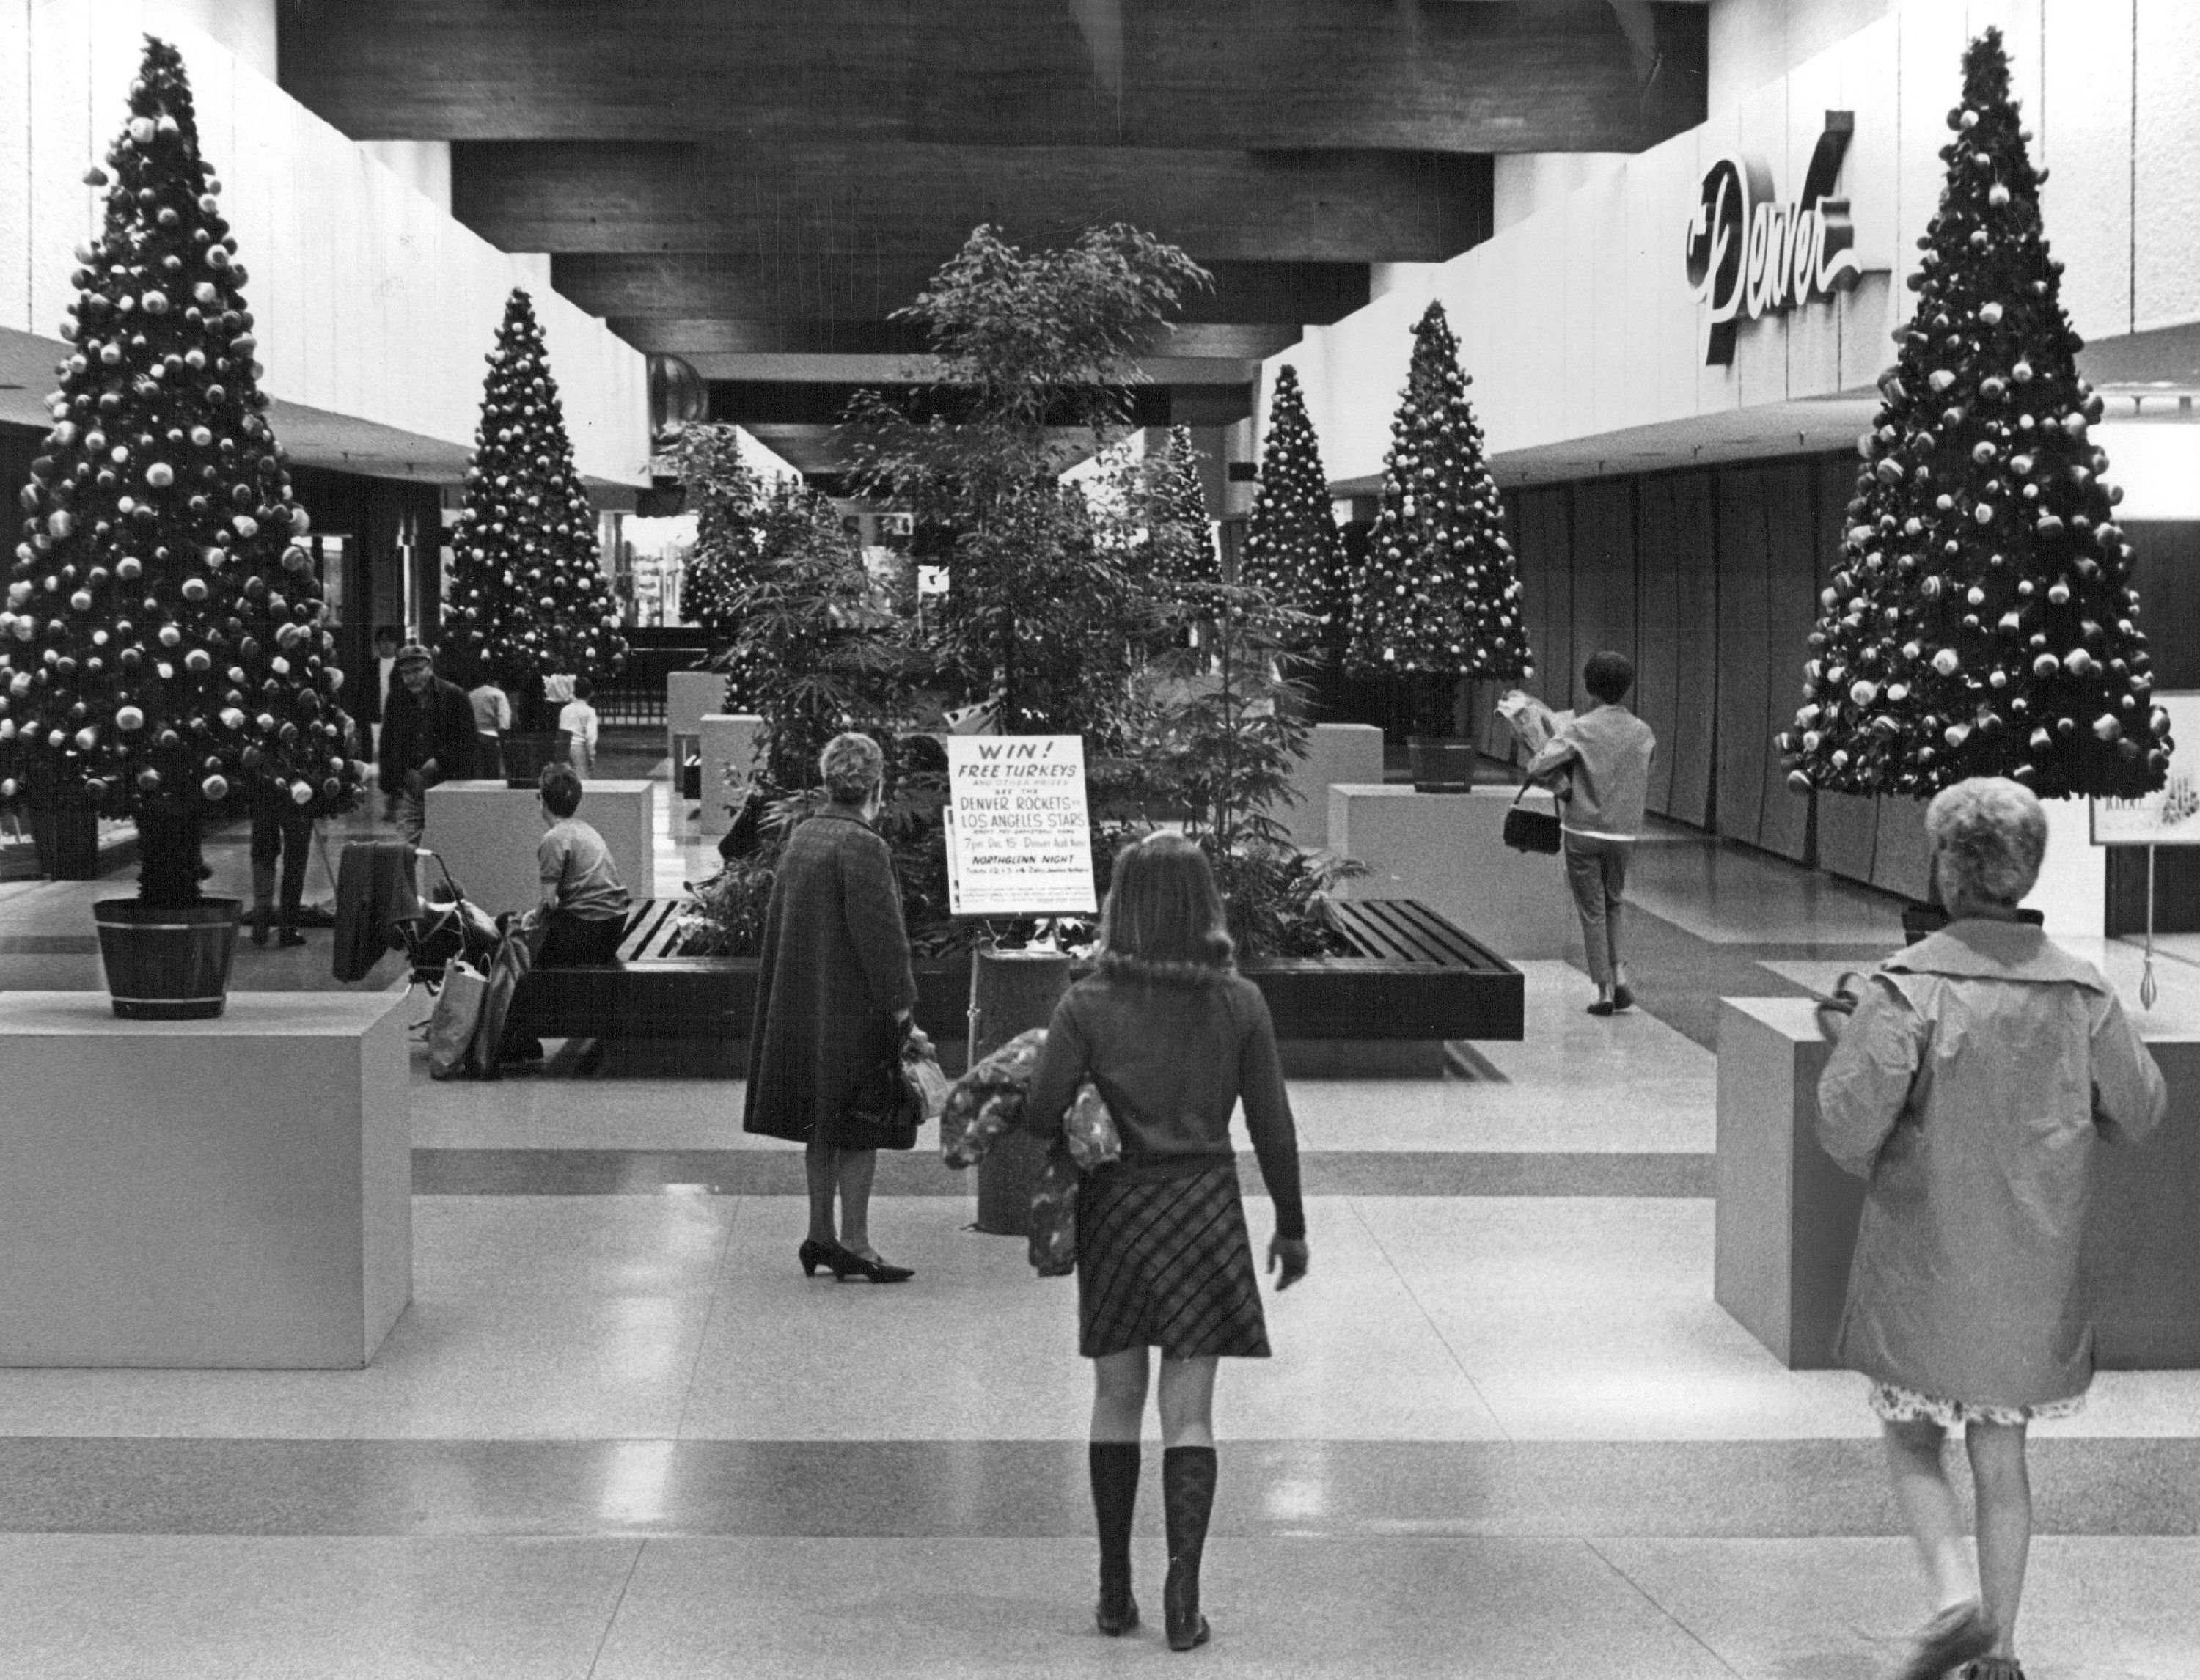 Shopping at the new closed in malls was a change from having to go to the huge downtown anchor stores.